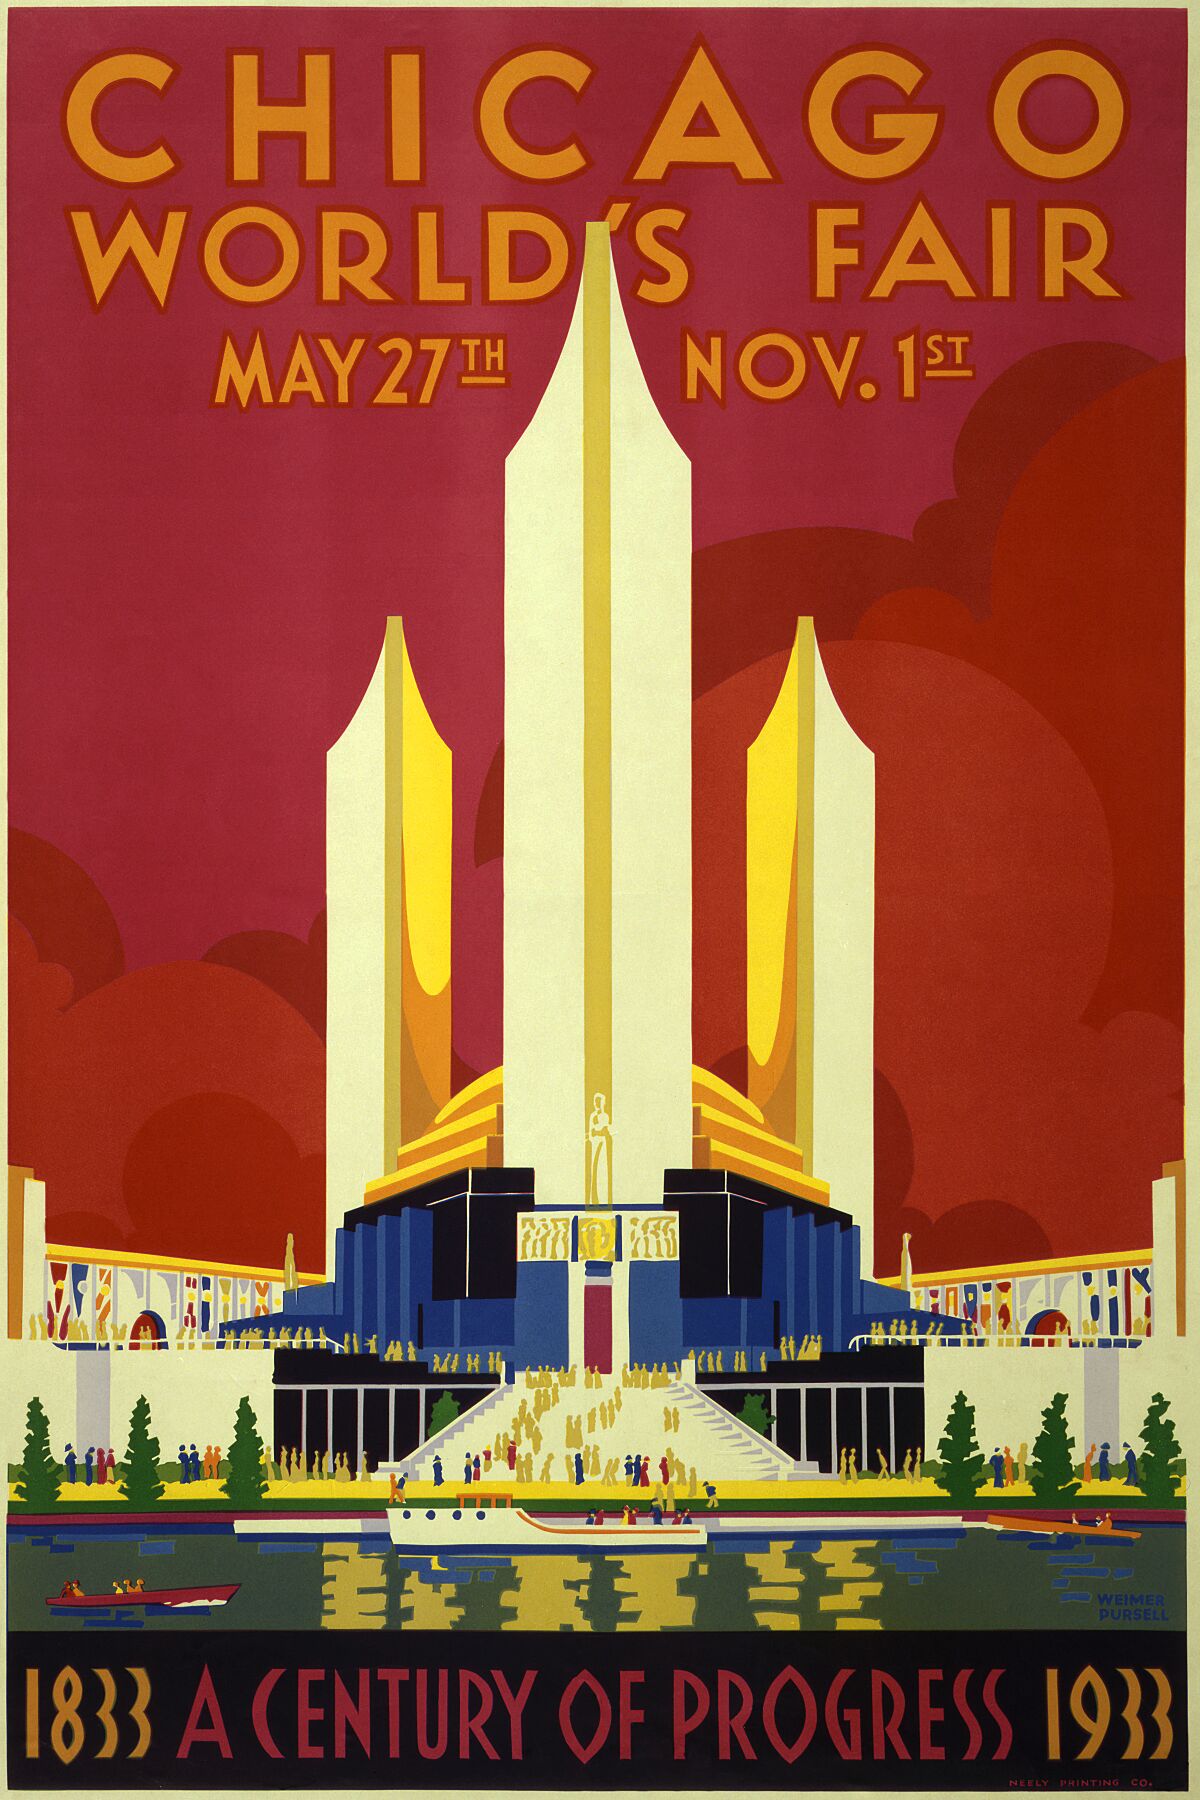 Poster for Century of Progress World's Fair showing exhibition buildings with boats on water in foreground. Date 1933 - Weimer Pursell, silkscreen print by Neely Printing